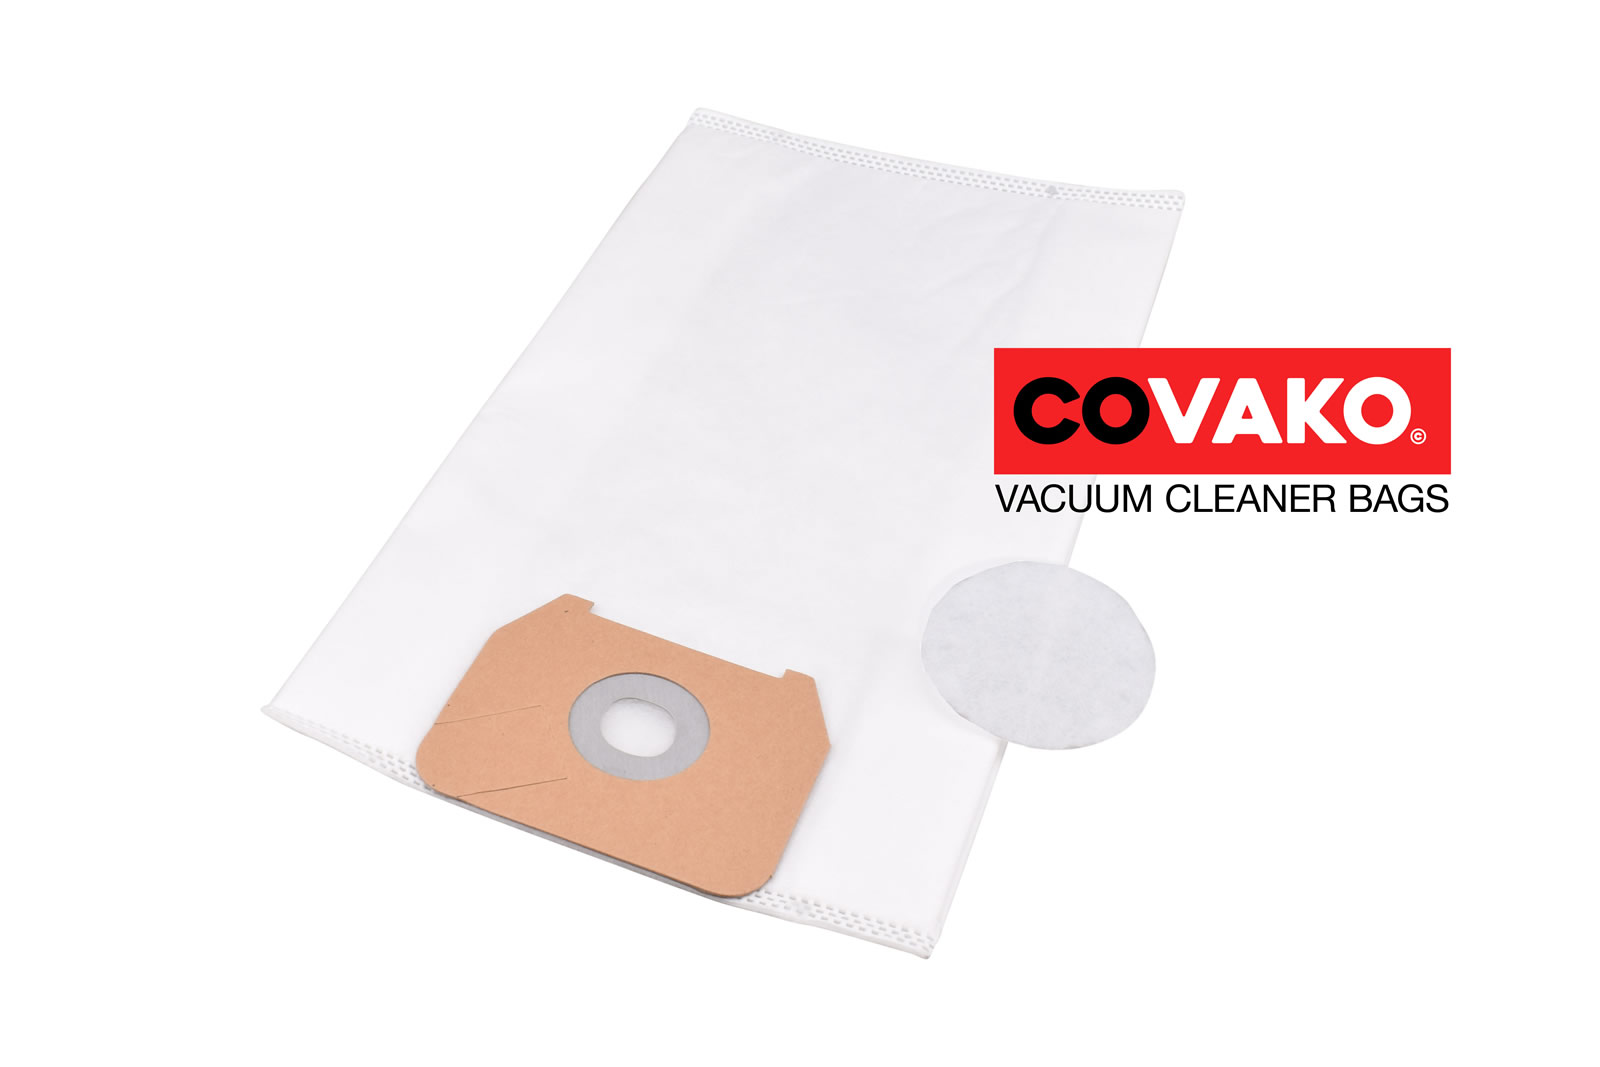 Comac Silent 11 Basic / Synthesis - Comac vacuum cleaner bags